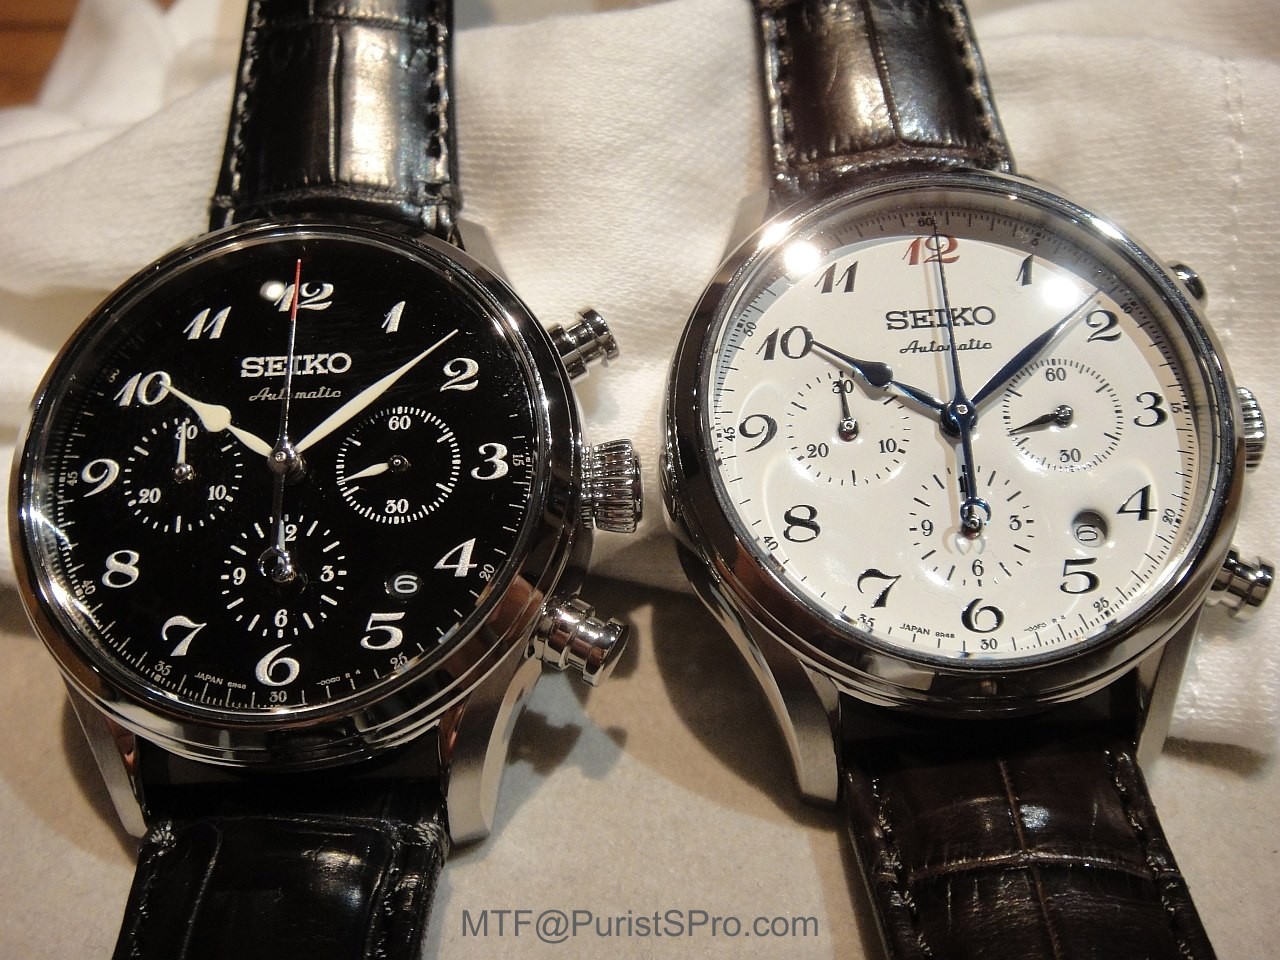 Presage Chronographs Limited Editions 1000 pieces each White Enamel and Black Urushi Lacquer